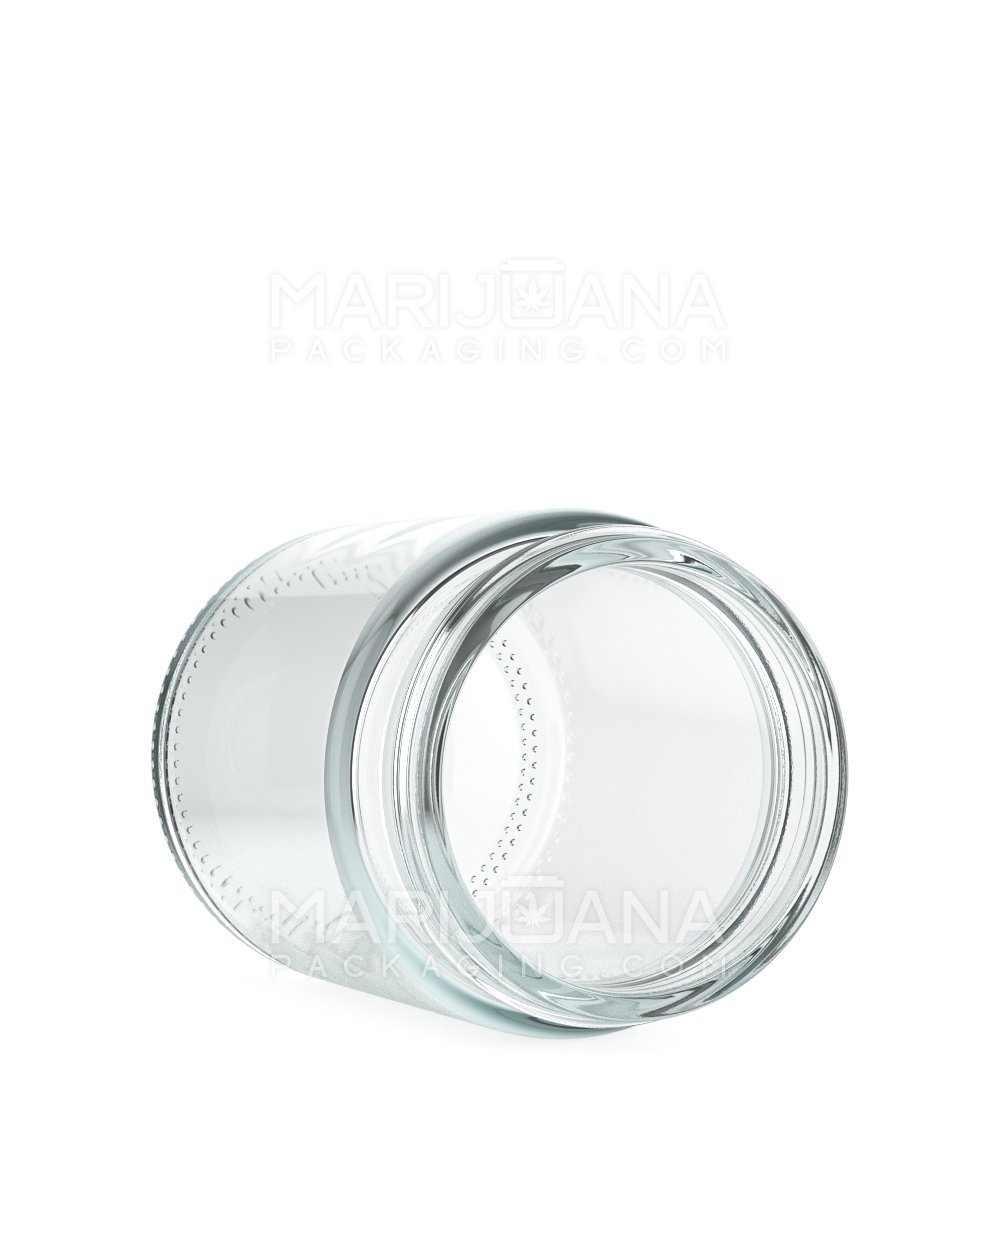 Straight Sided Clear Glass Jars | 50mm - 4oz - 100 Count - 3